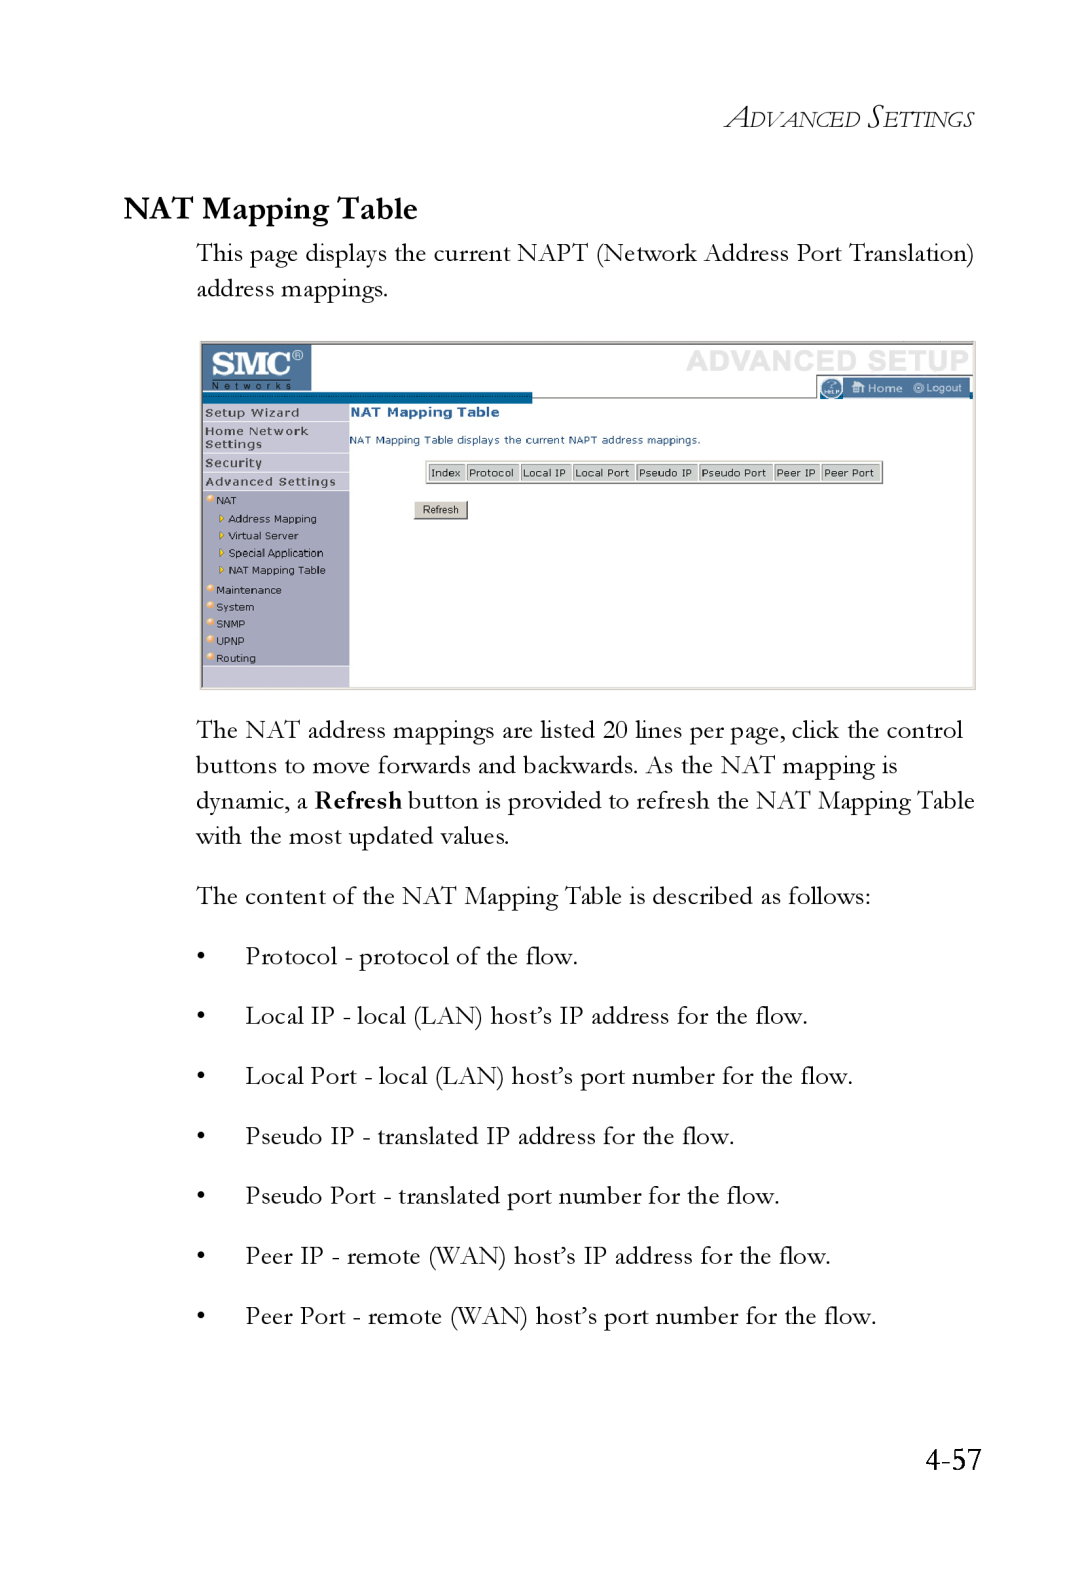 SMC Networks SMCWBR14T-G manual 4-57, NAT Mapping Table 